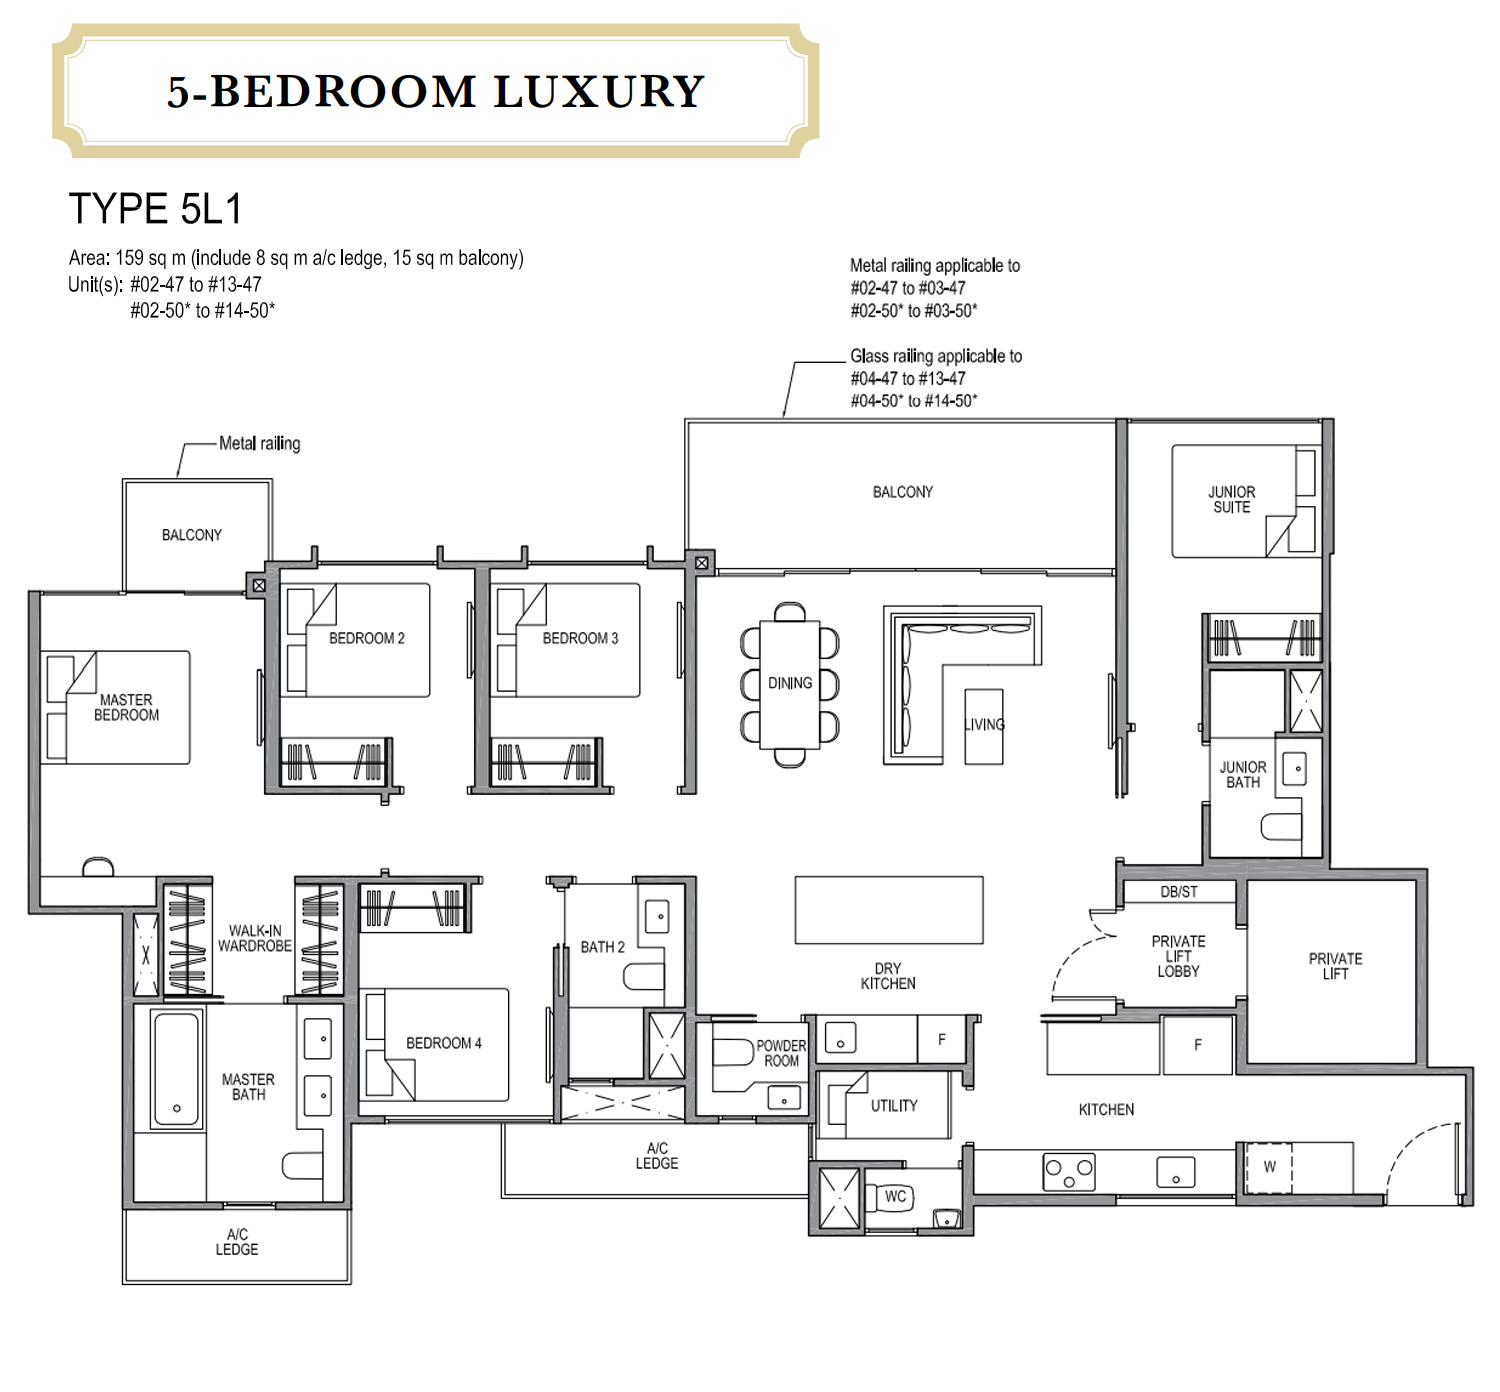 Woodleigh Lane Units Mix and Floor Plans